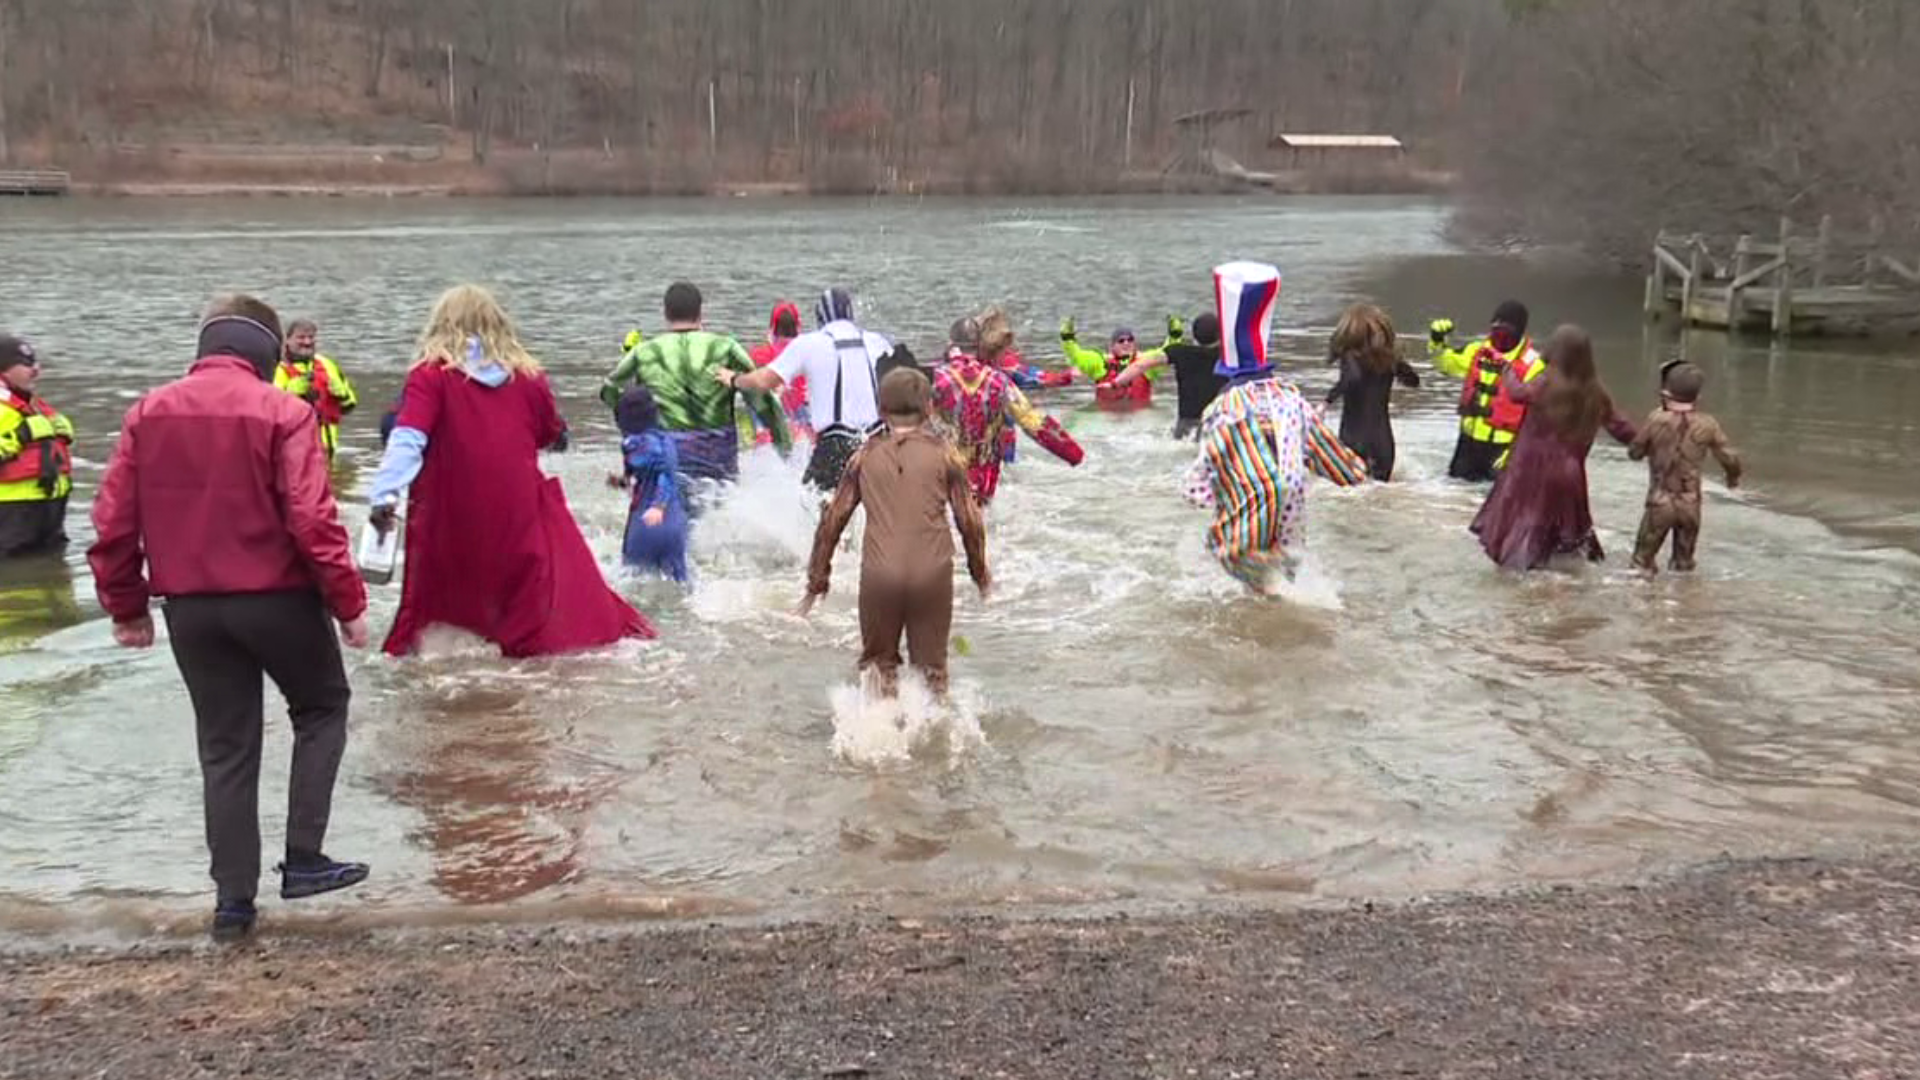 Frigid temps and cold water didn't stop people from taking a dip to raise money for Boy Scouts.